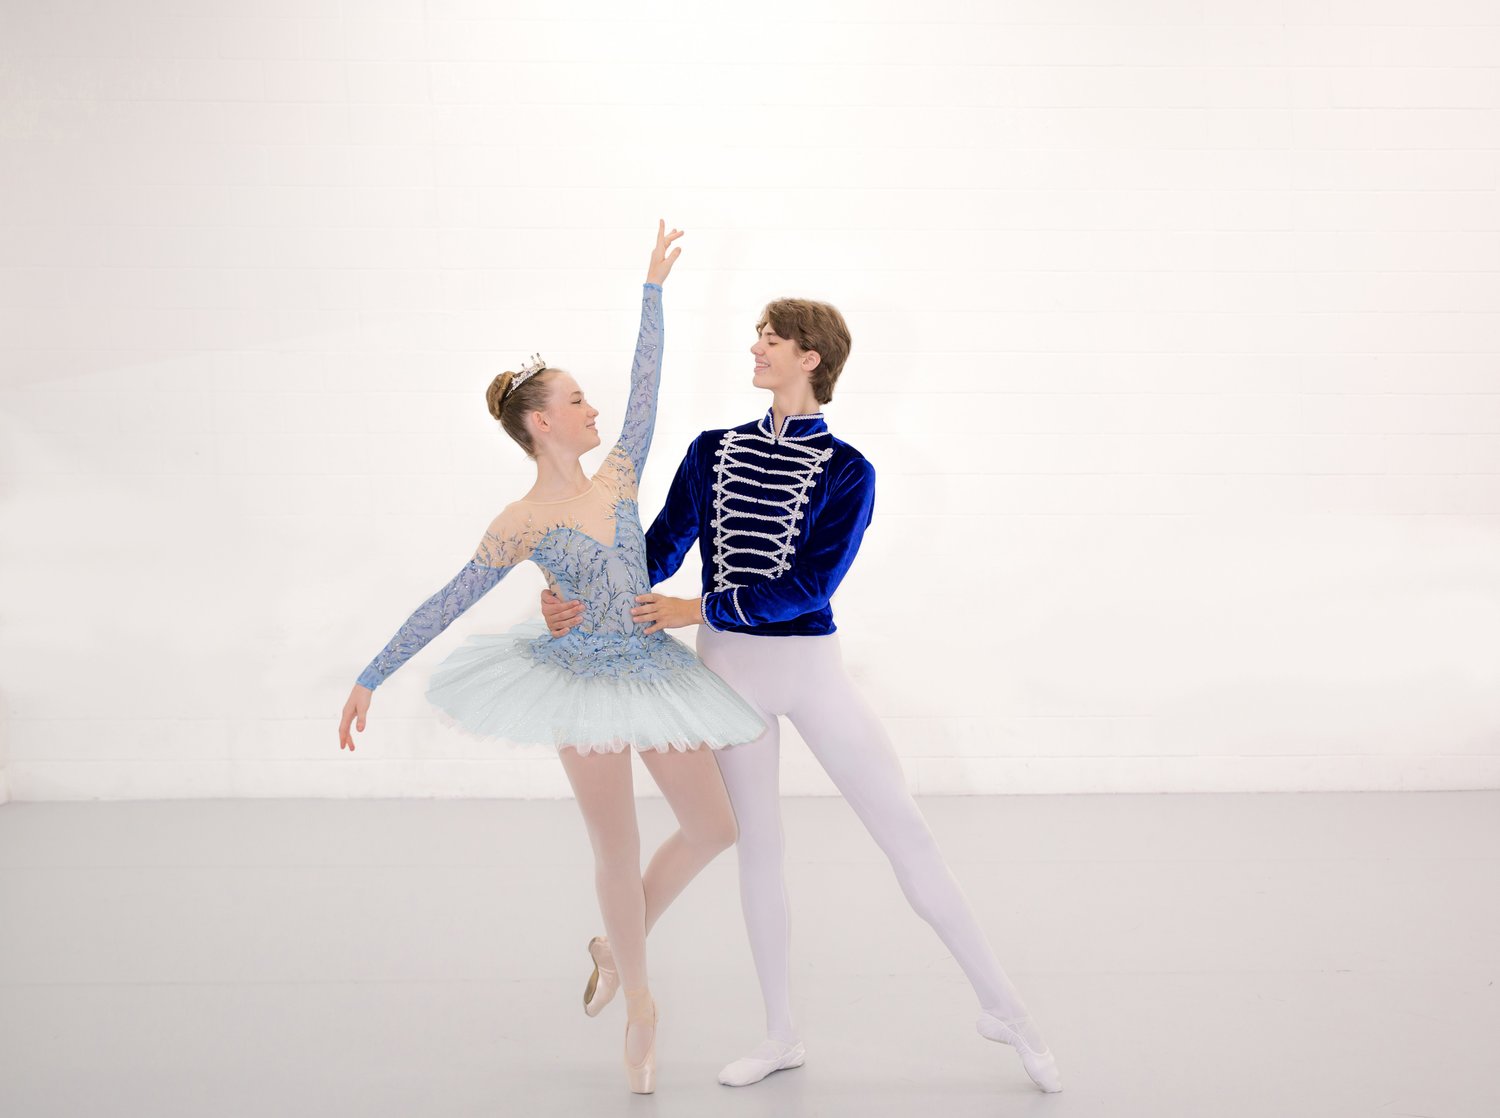 Dancers Annabelle Hucke and Jake Karger will perform as Cinderella and the Prince in ‘Cinderella’ on June 8 at Lewis Auditorium.